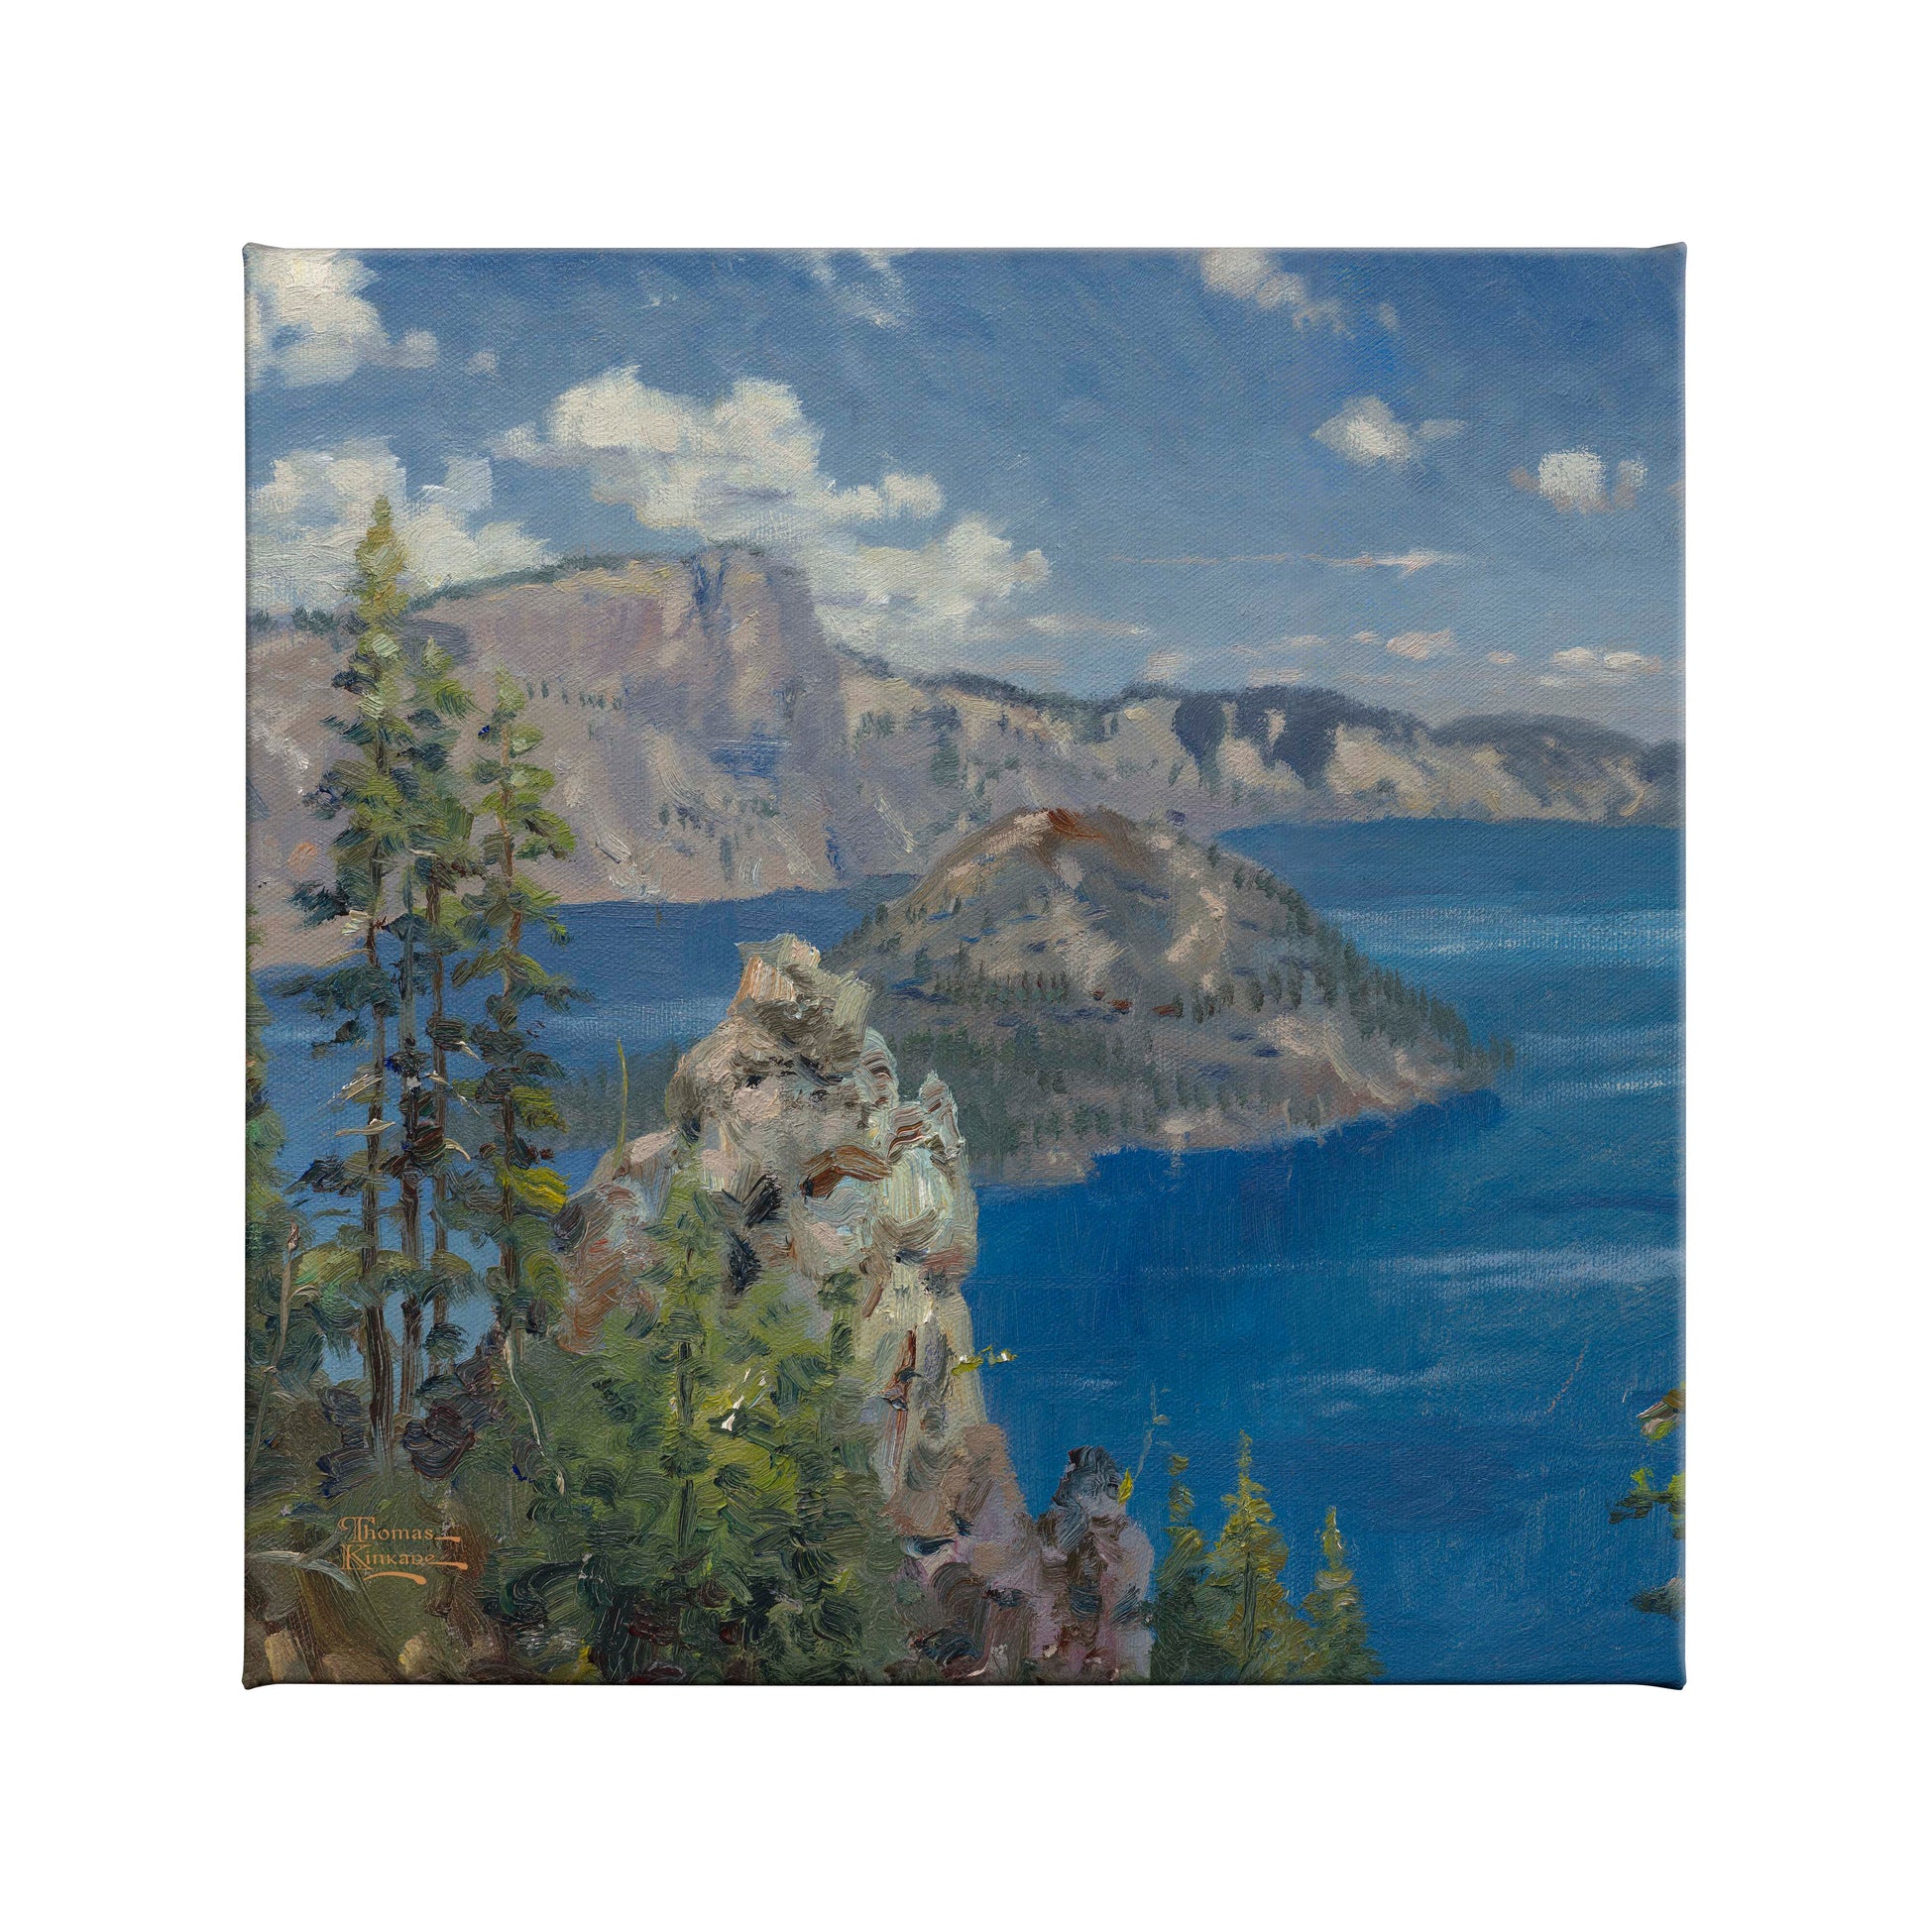 161768_CGW Crater Lake 14X14 Gallery Wrap Canvas_Mocked_F.jpg